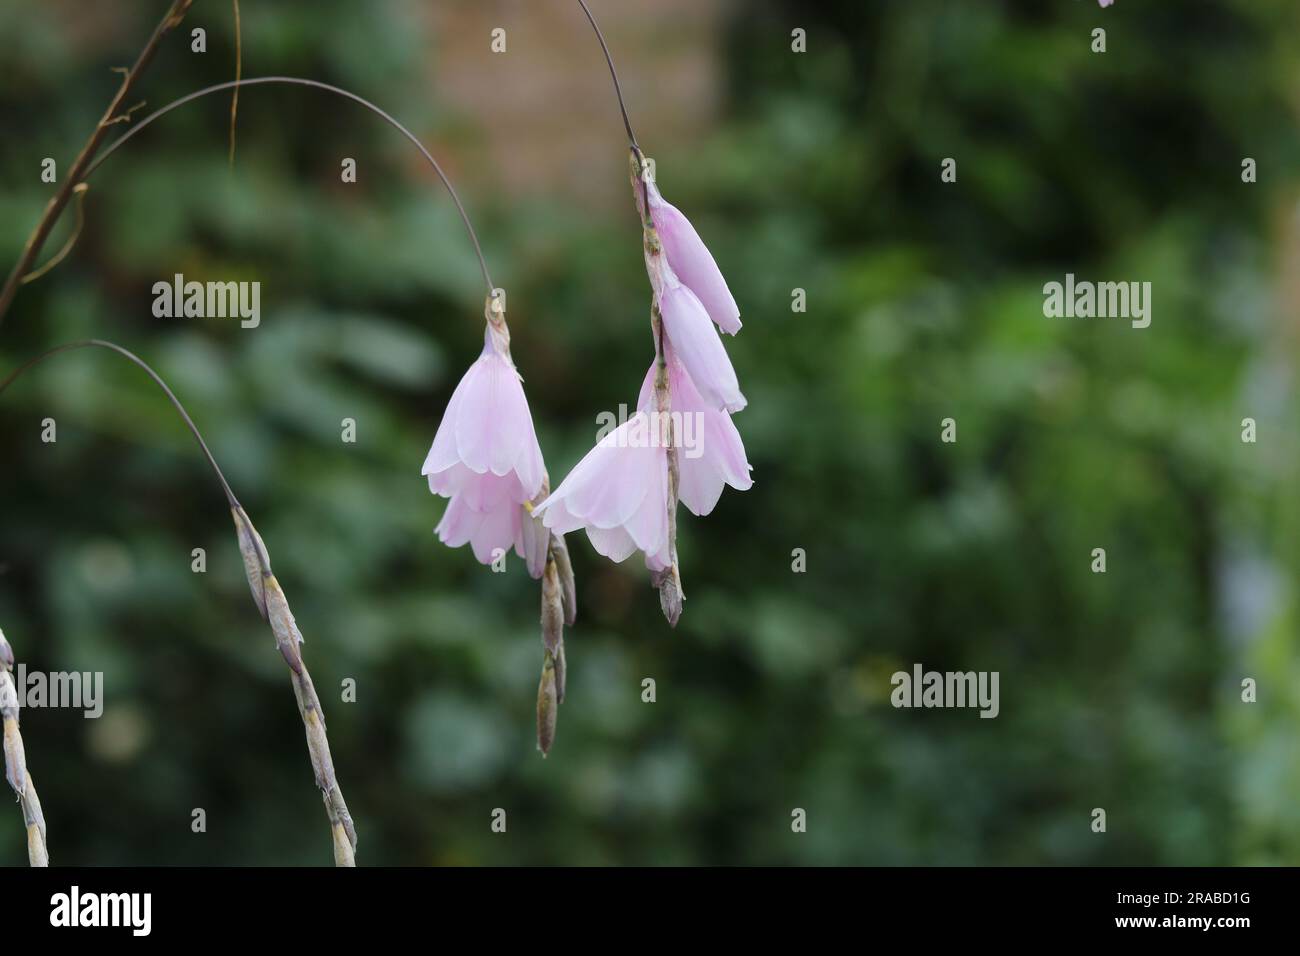 Angel's fishing rod flowers or dierama plant in walled garden Stock Photo